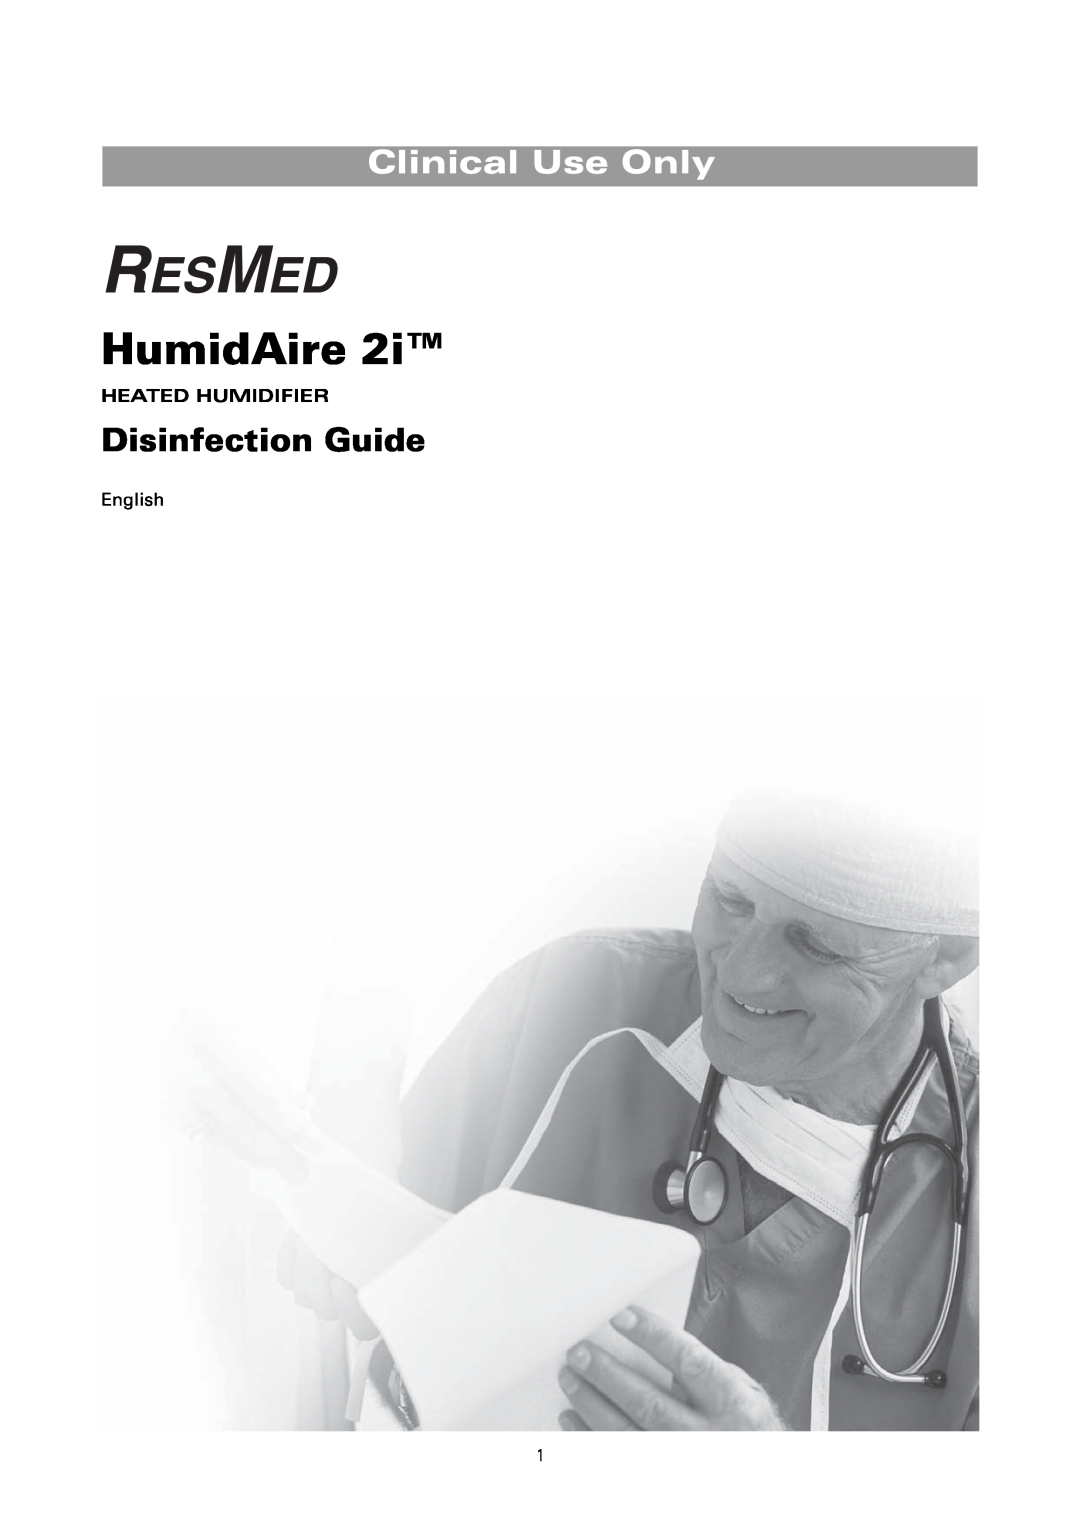 ResMed HumidAire 2i manual Clinical Use Only, Disinfection Guide 